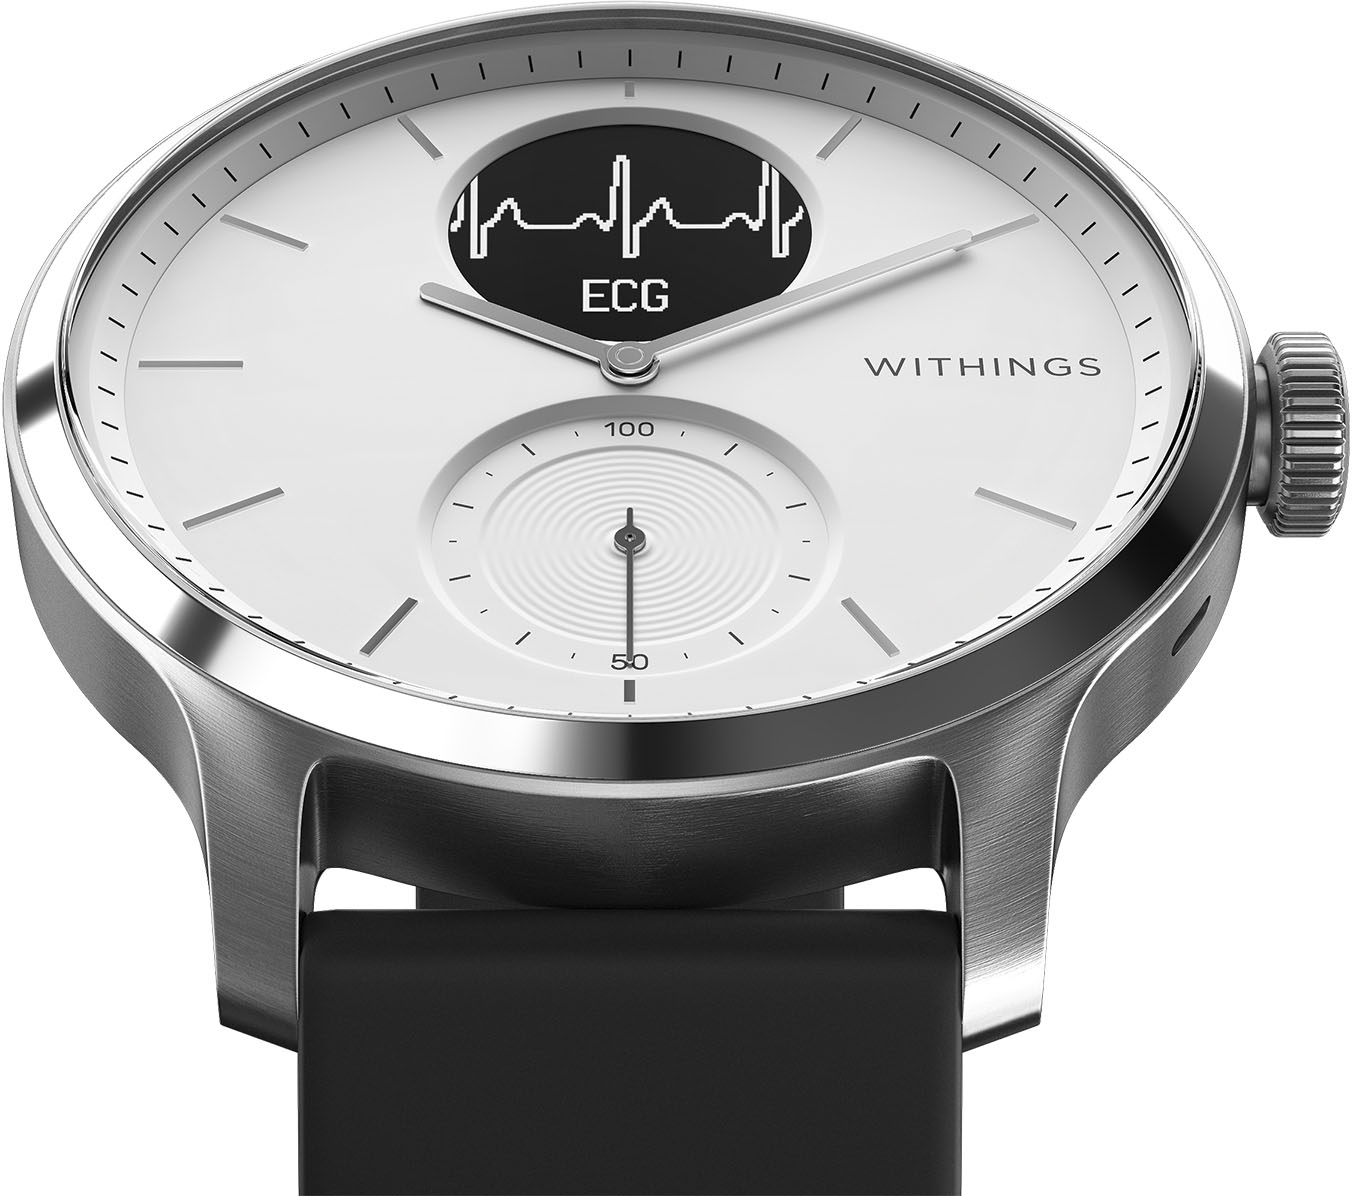 Withings announced new hybrid smartwatch Scanwatch Horizon